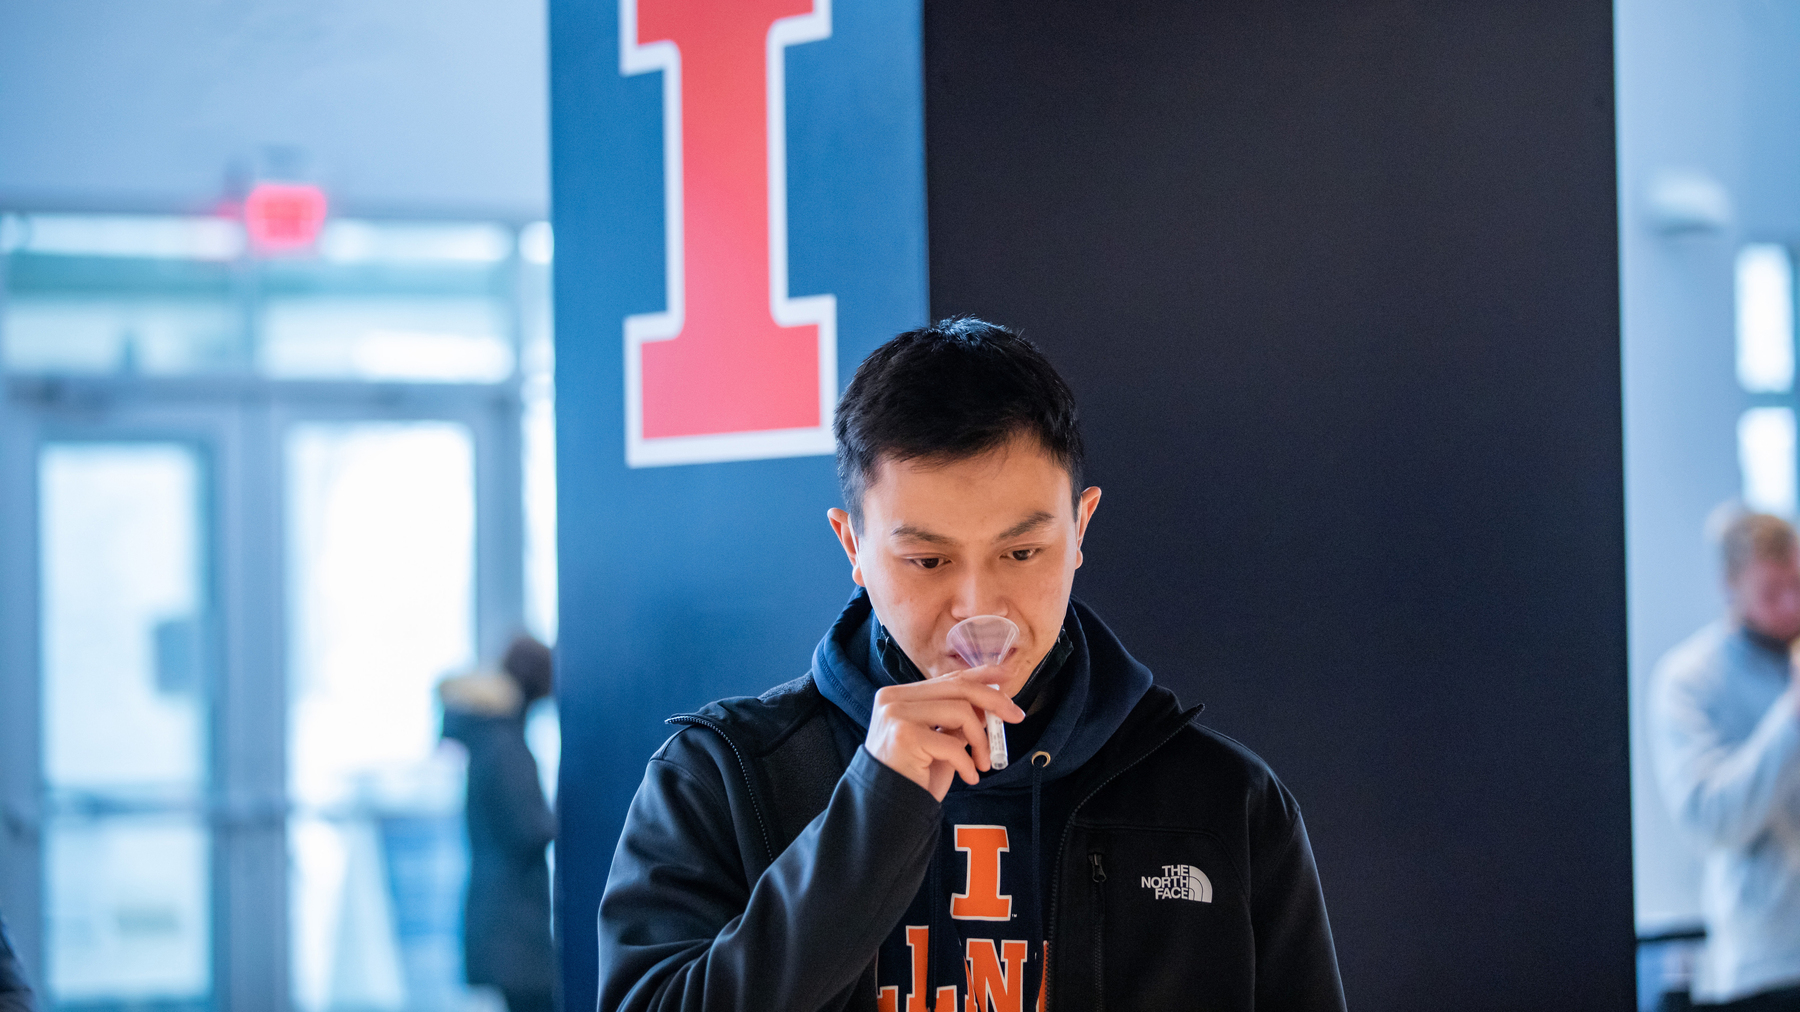 Illinois student uses a funnel to spit in a tube as part of COVID testing